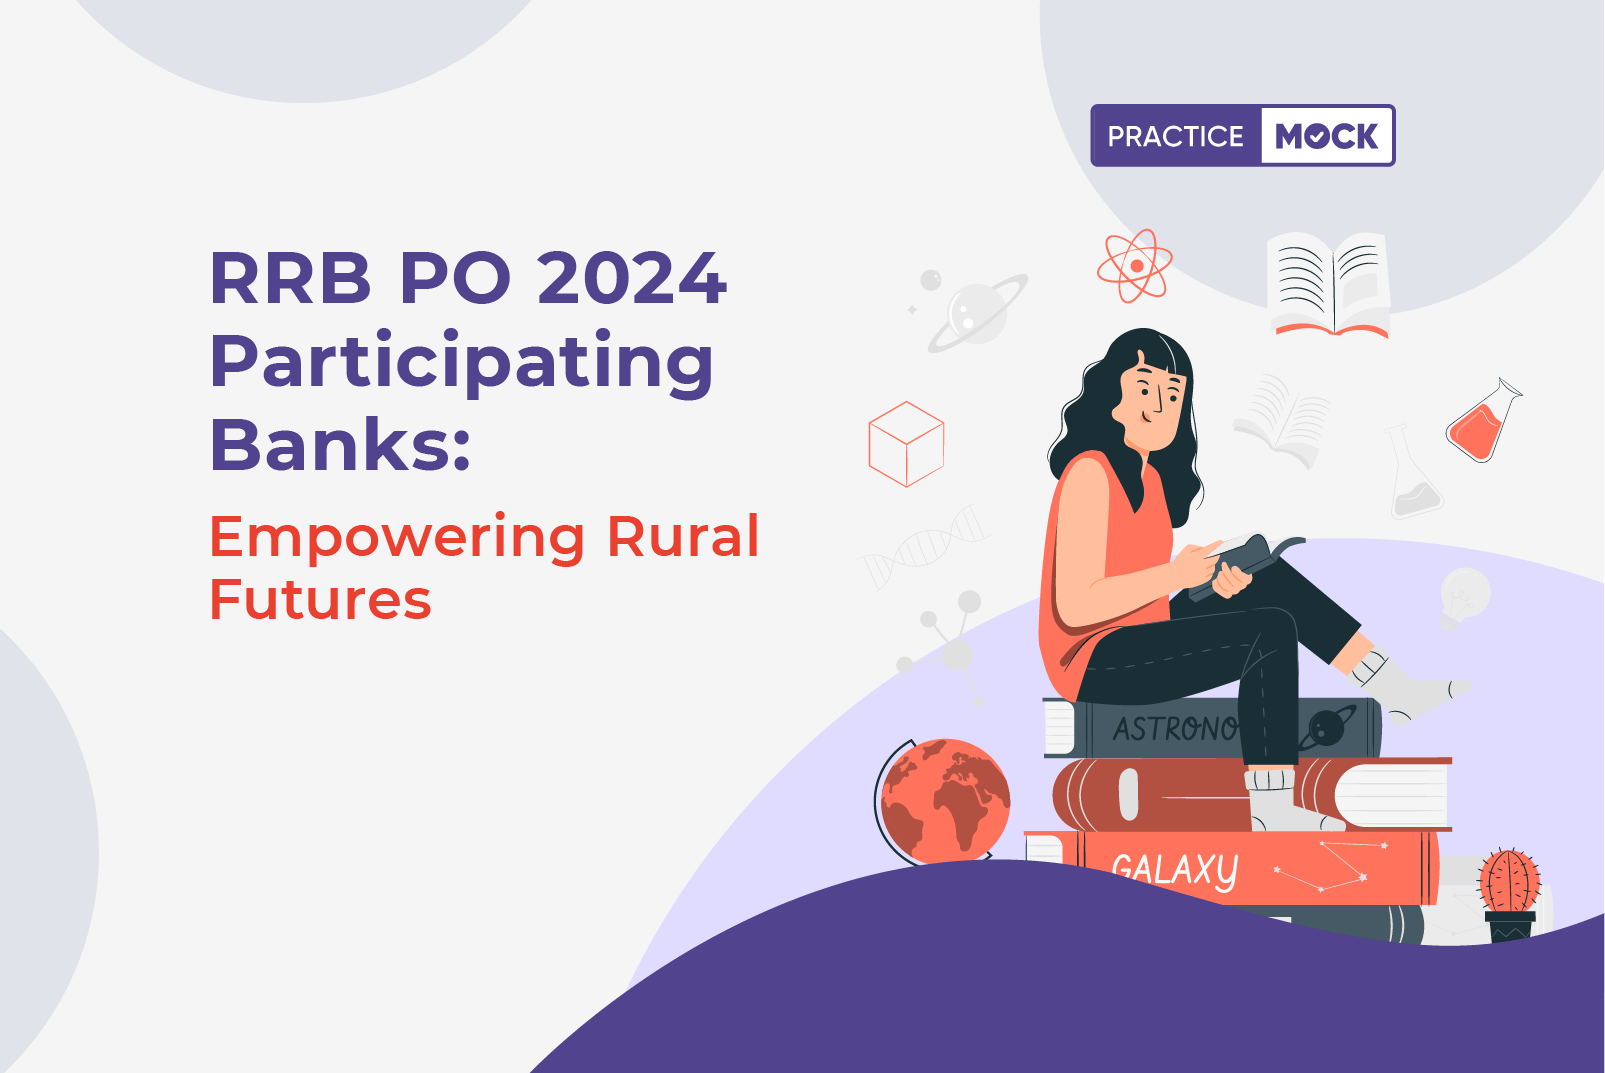 RRB PO 2024 Participating Banks: Empowering Rural Futures